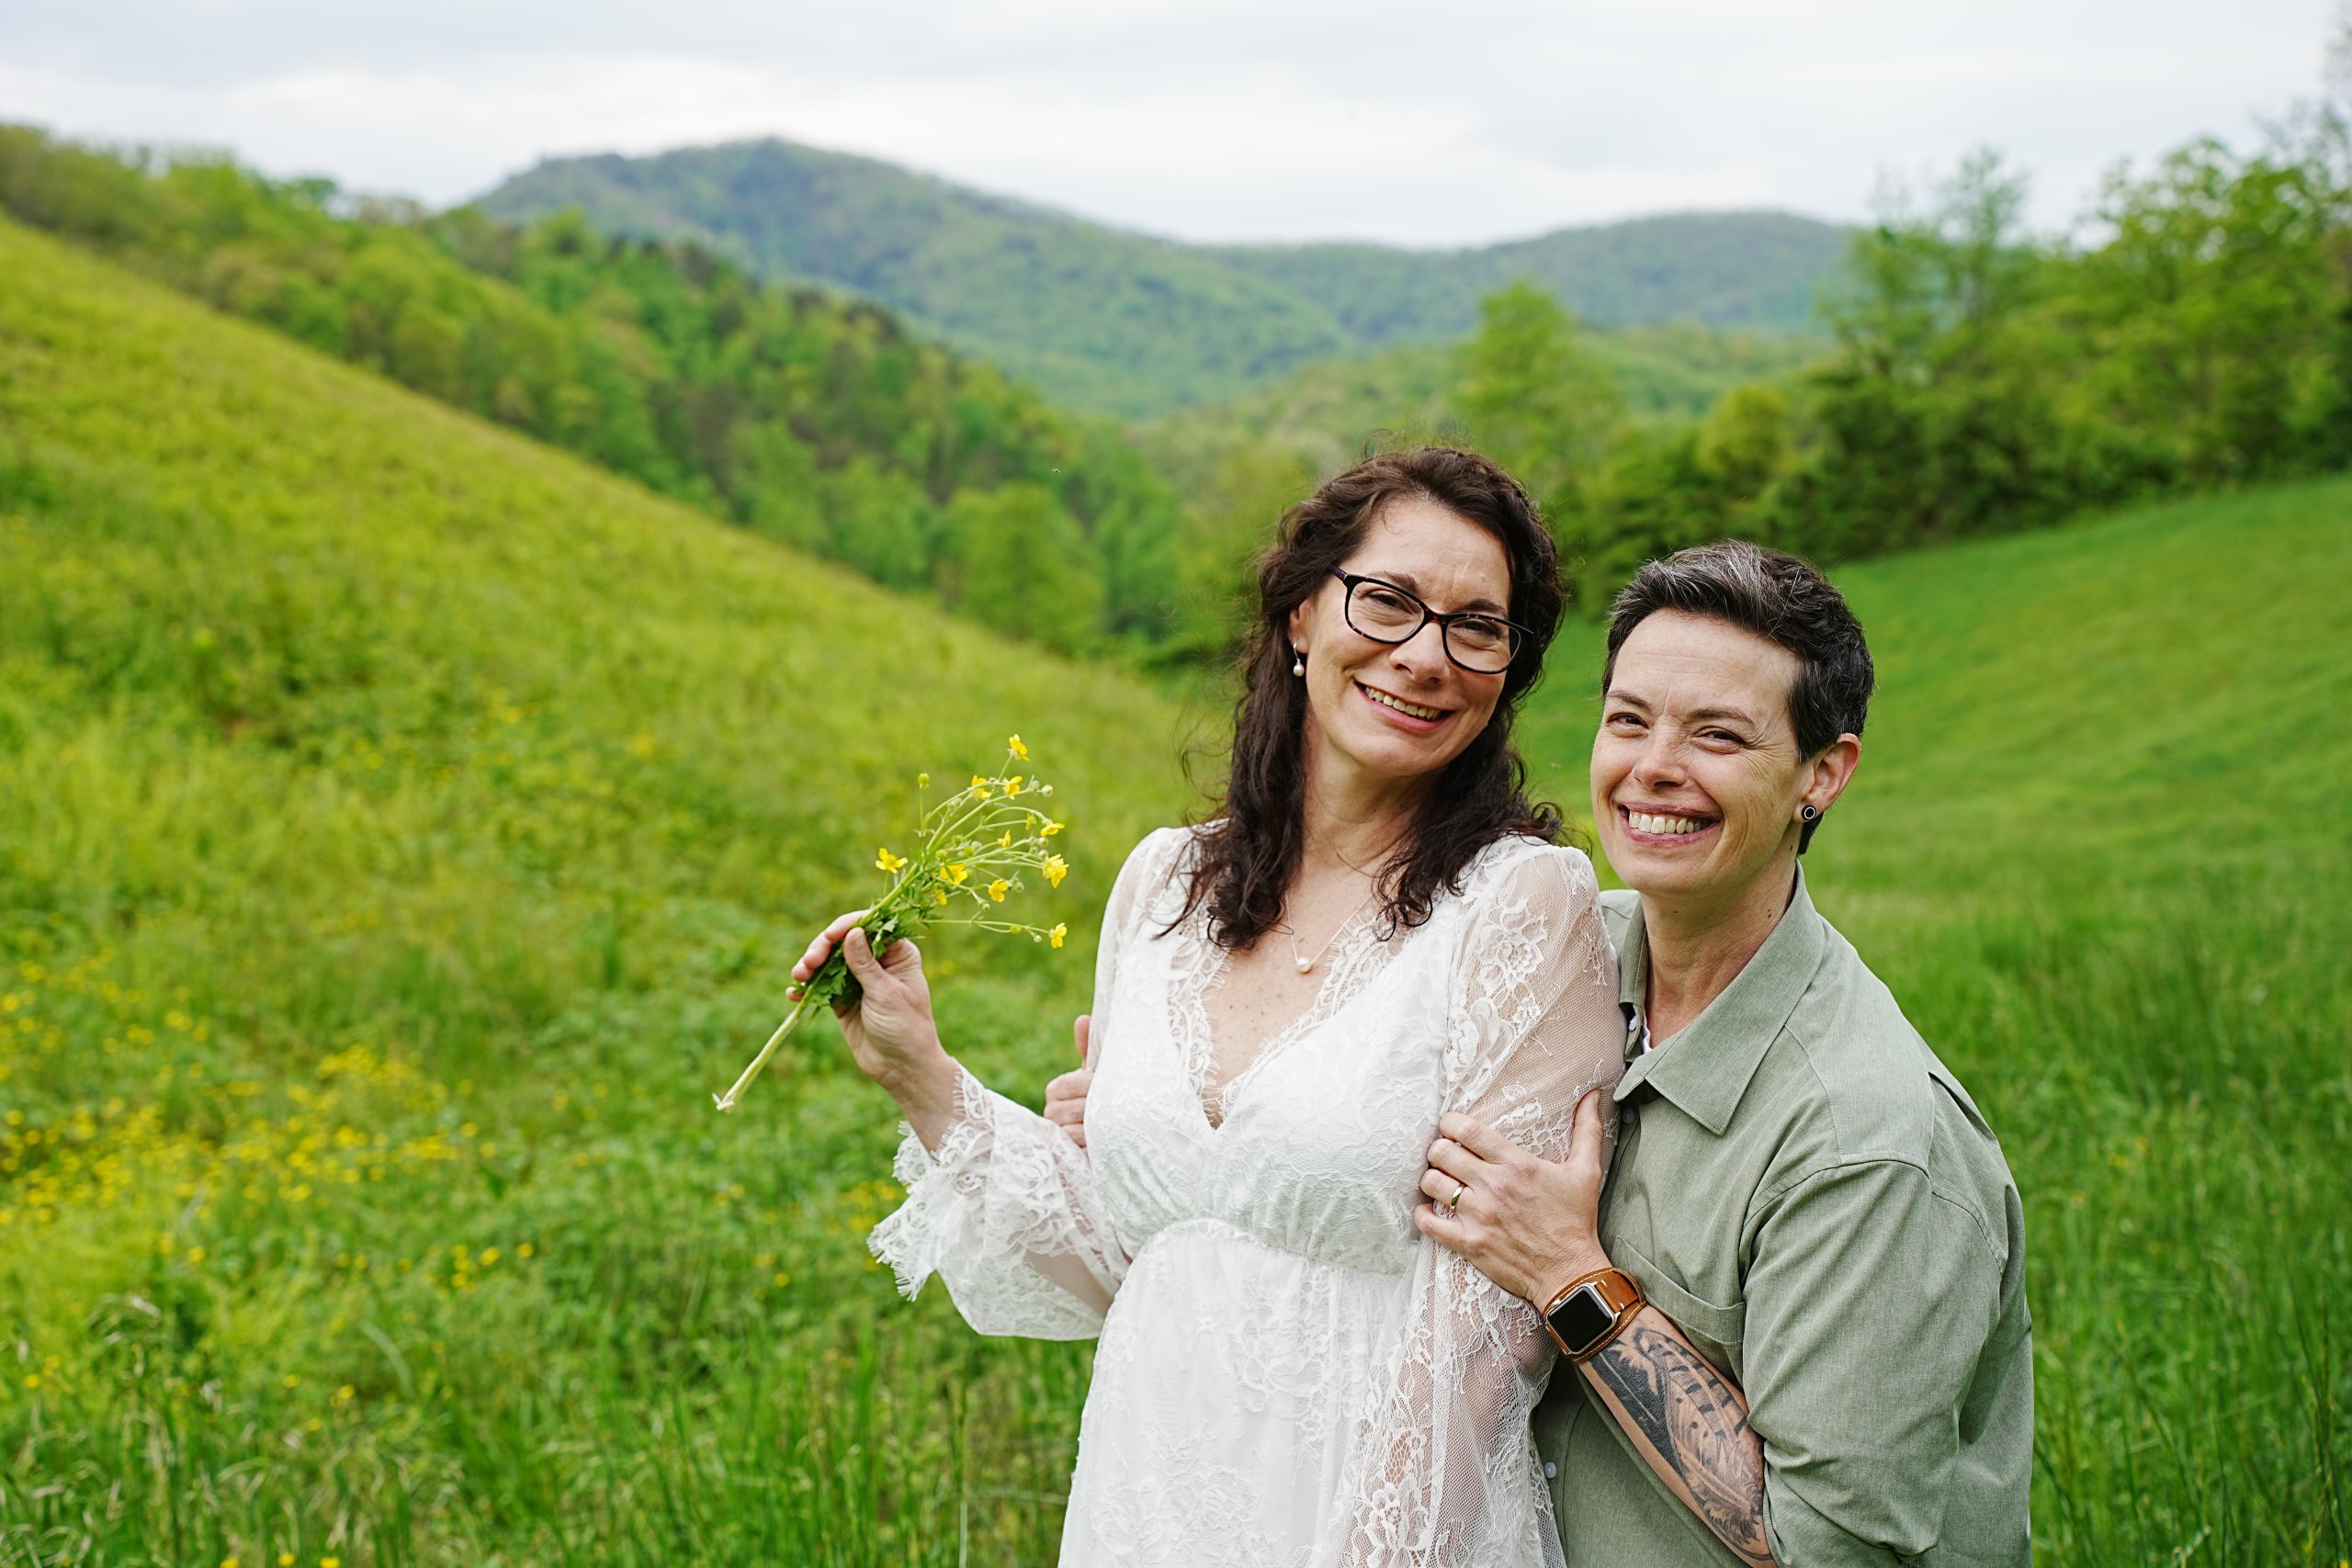 Bride and bride at a mountain view in the spring holding yellow flowers